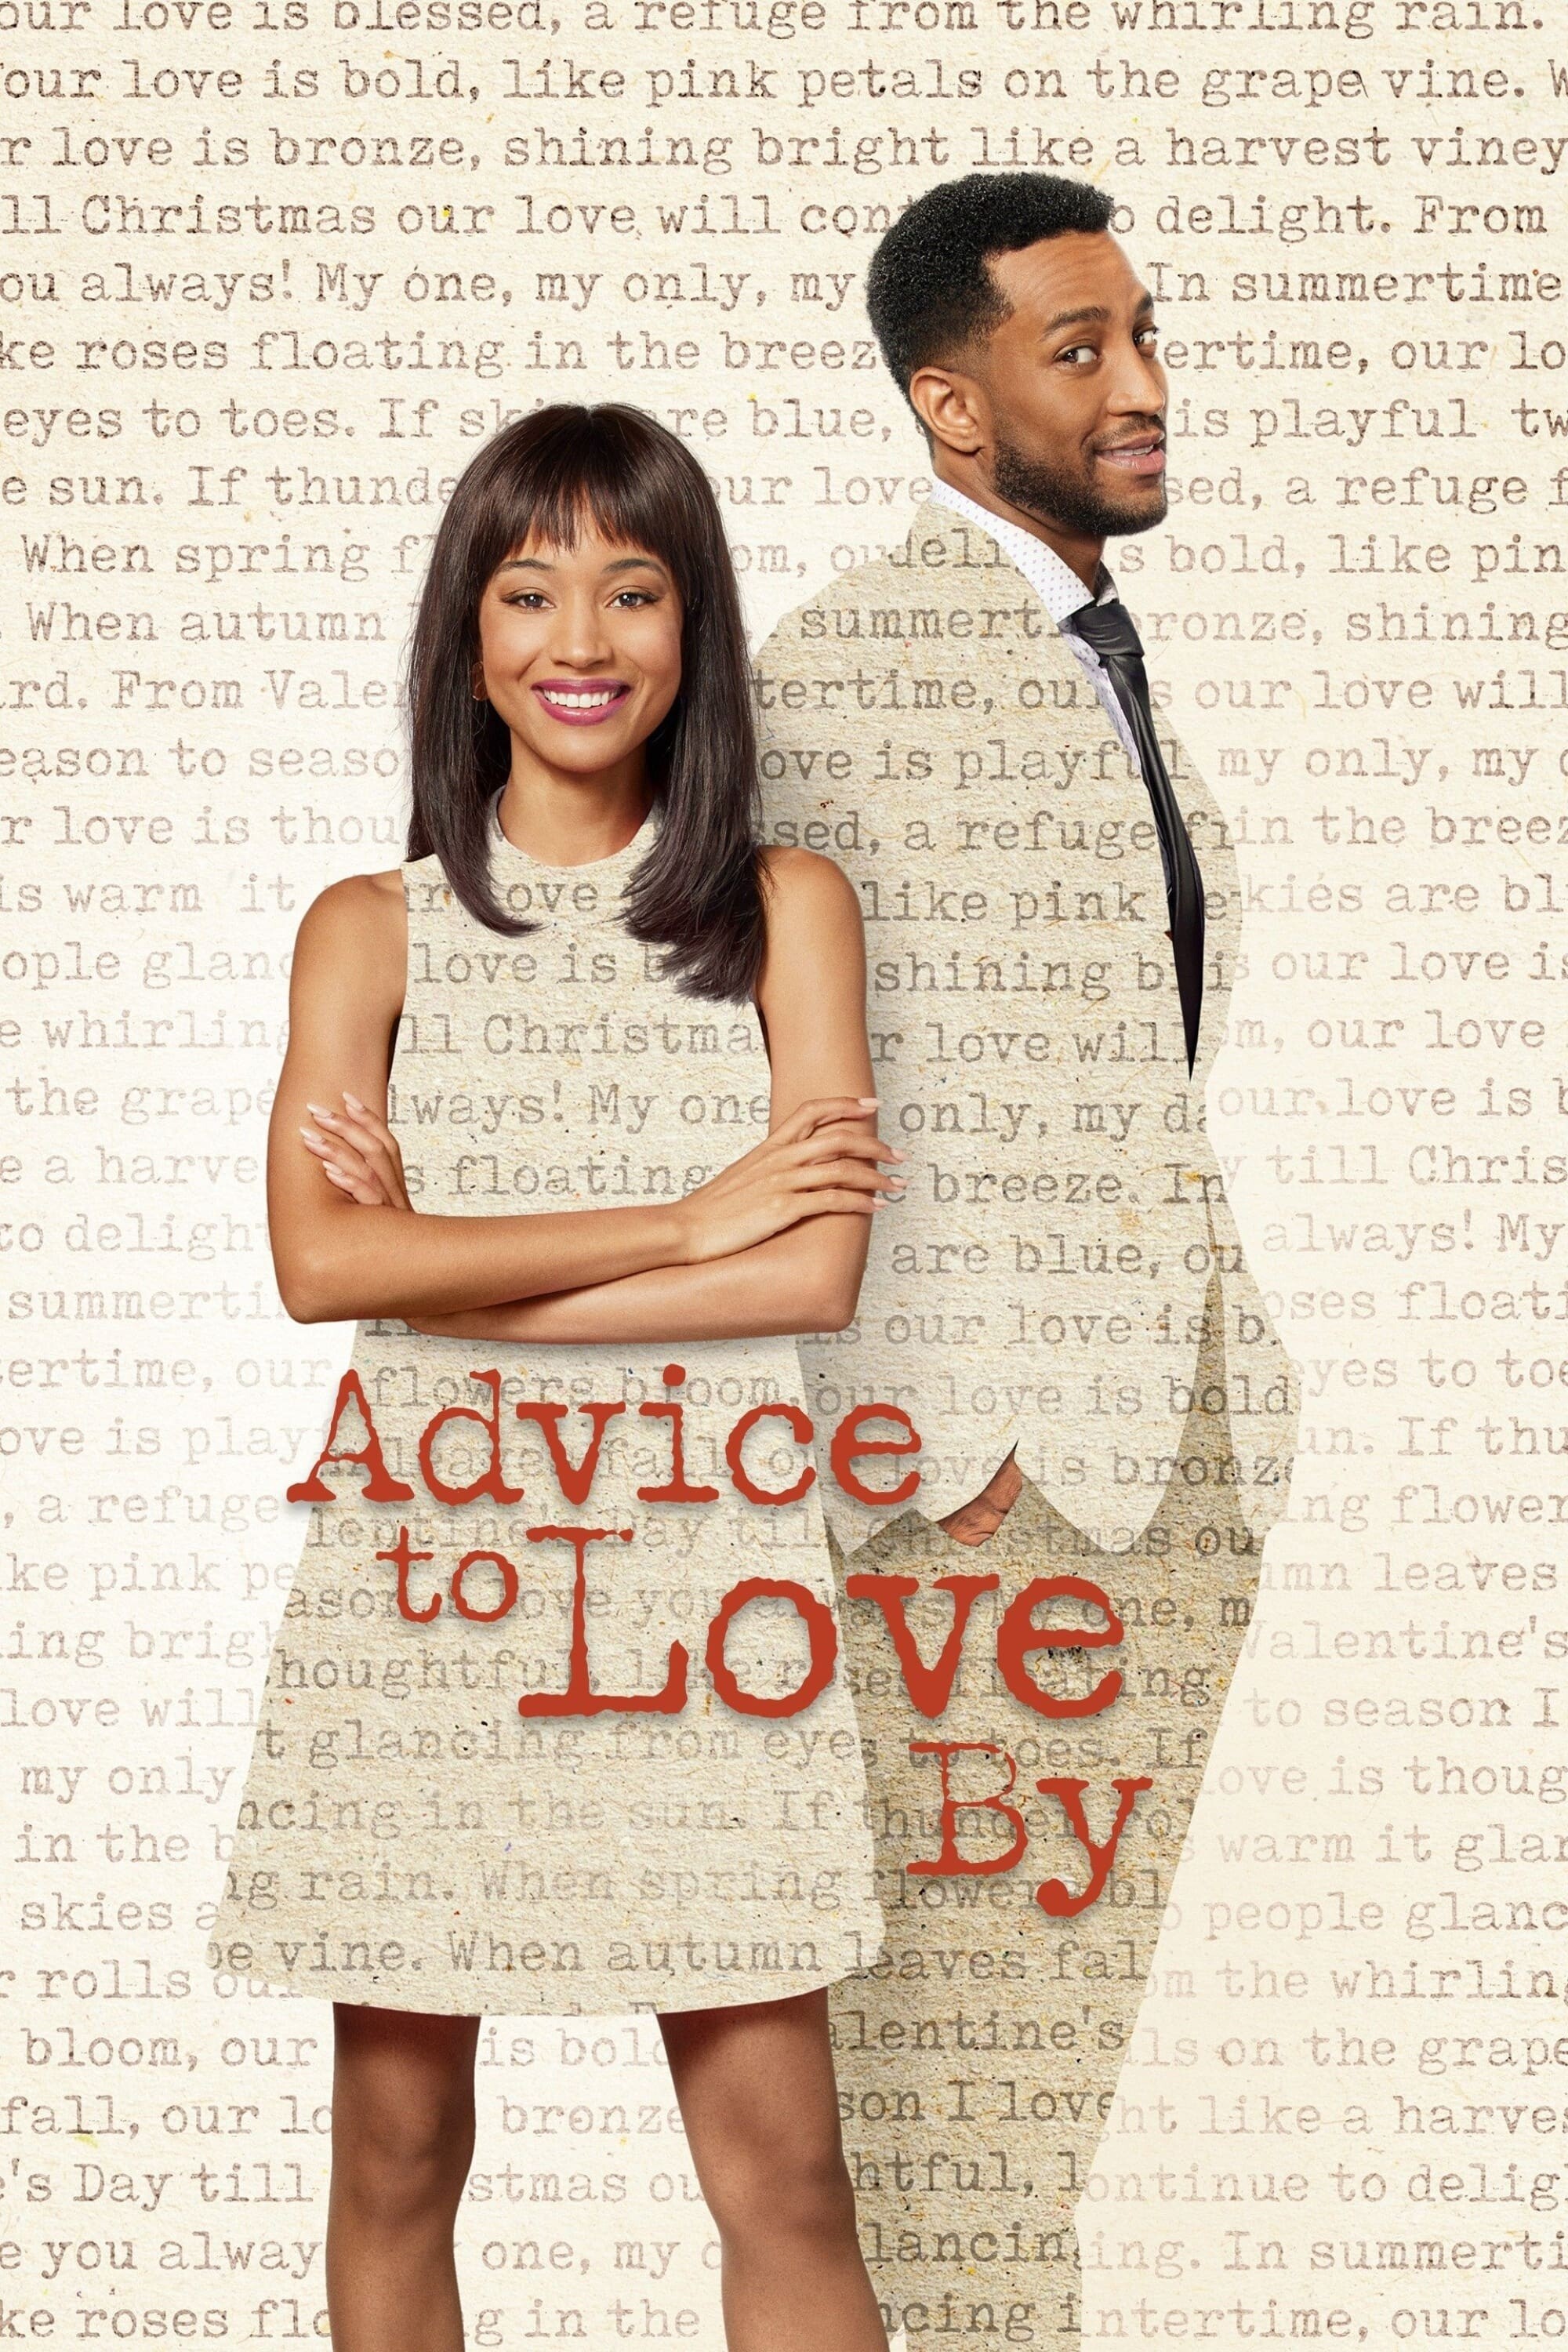 Advice to Love By 2021 1080p WEB-DL AAC2 0 H 264-HOSSDELGADO